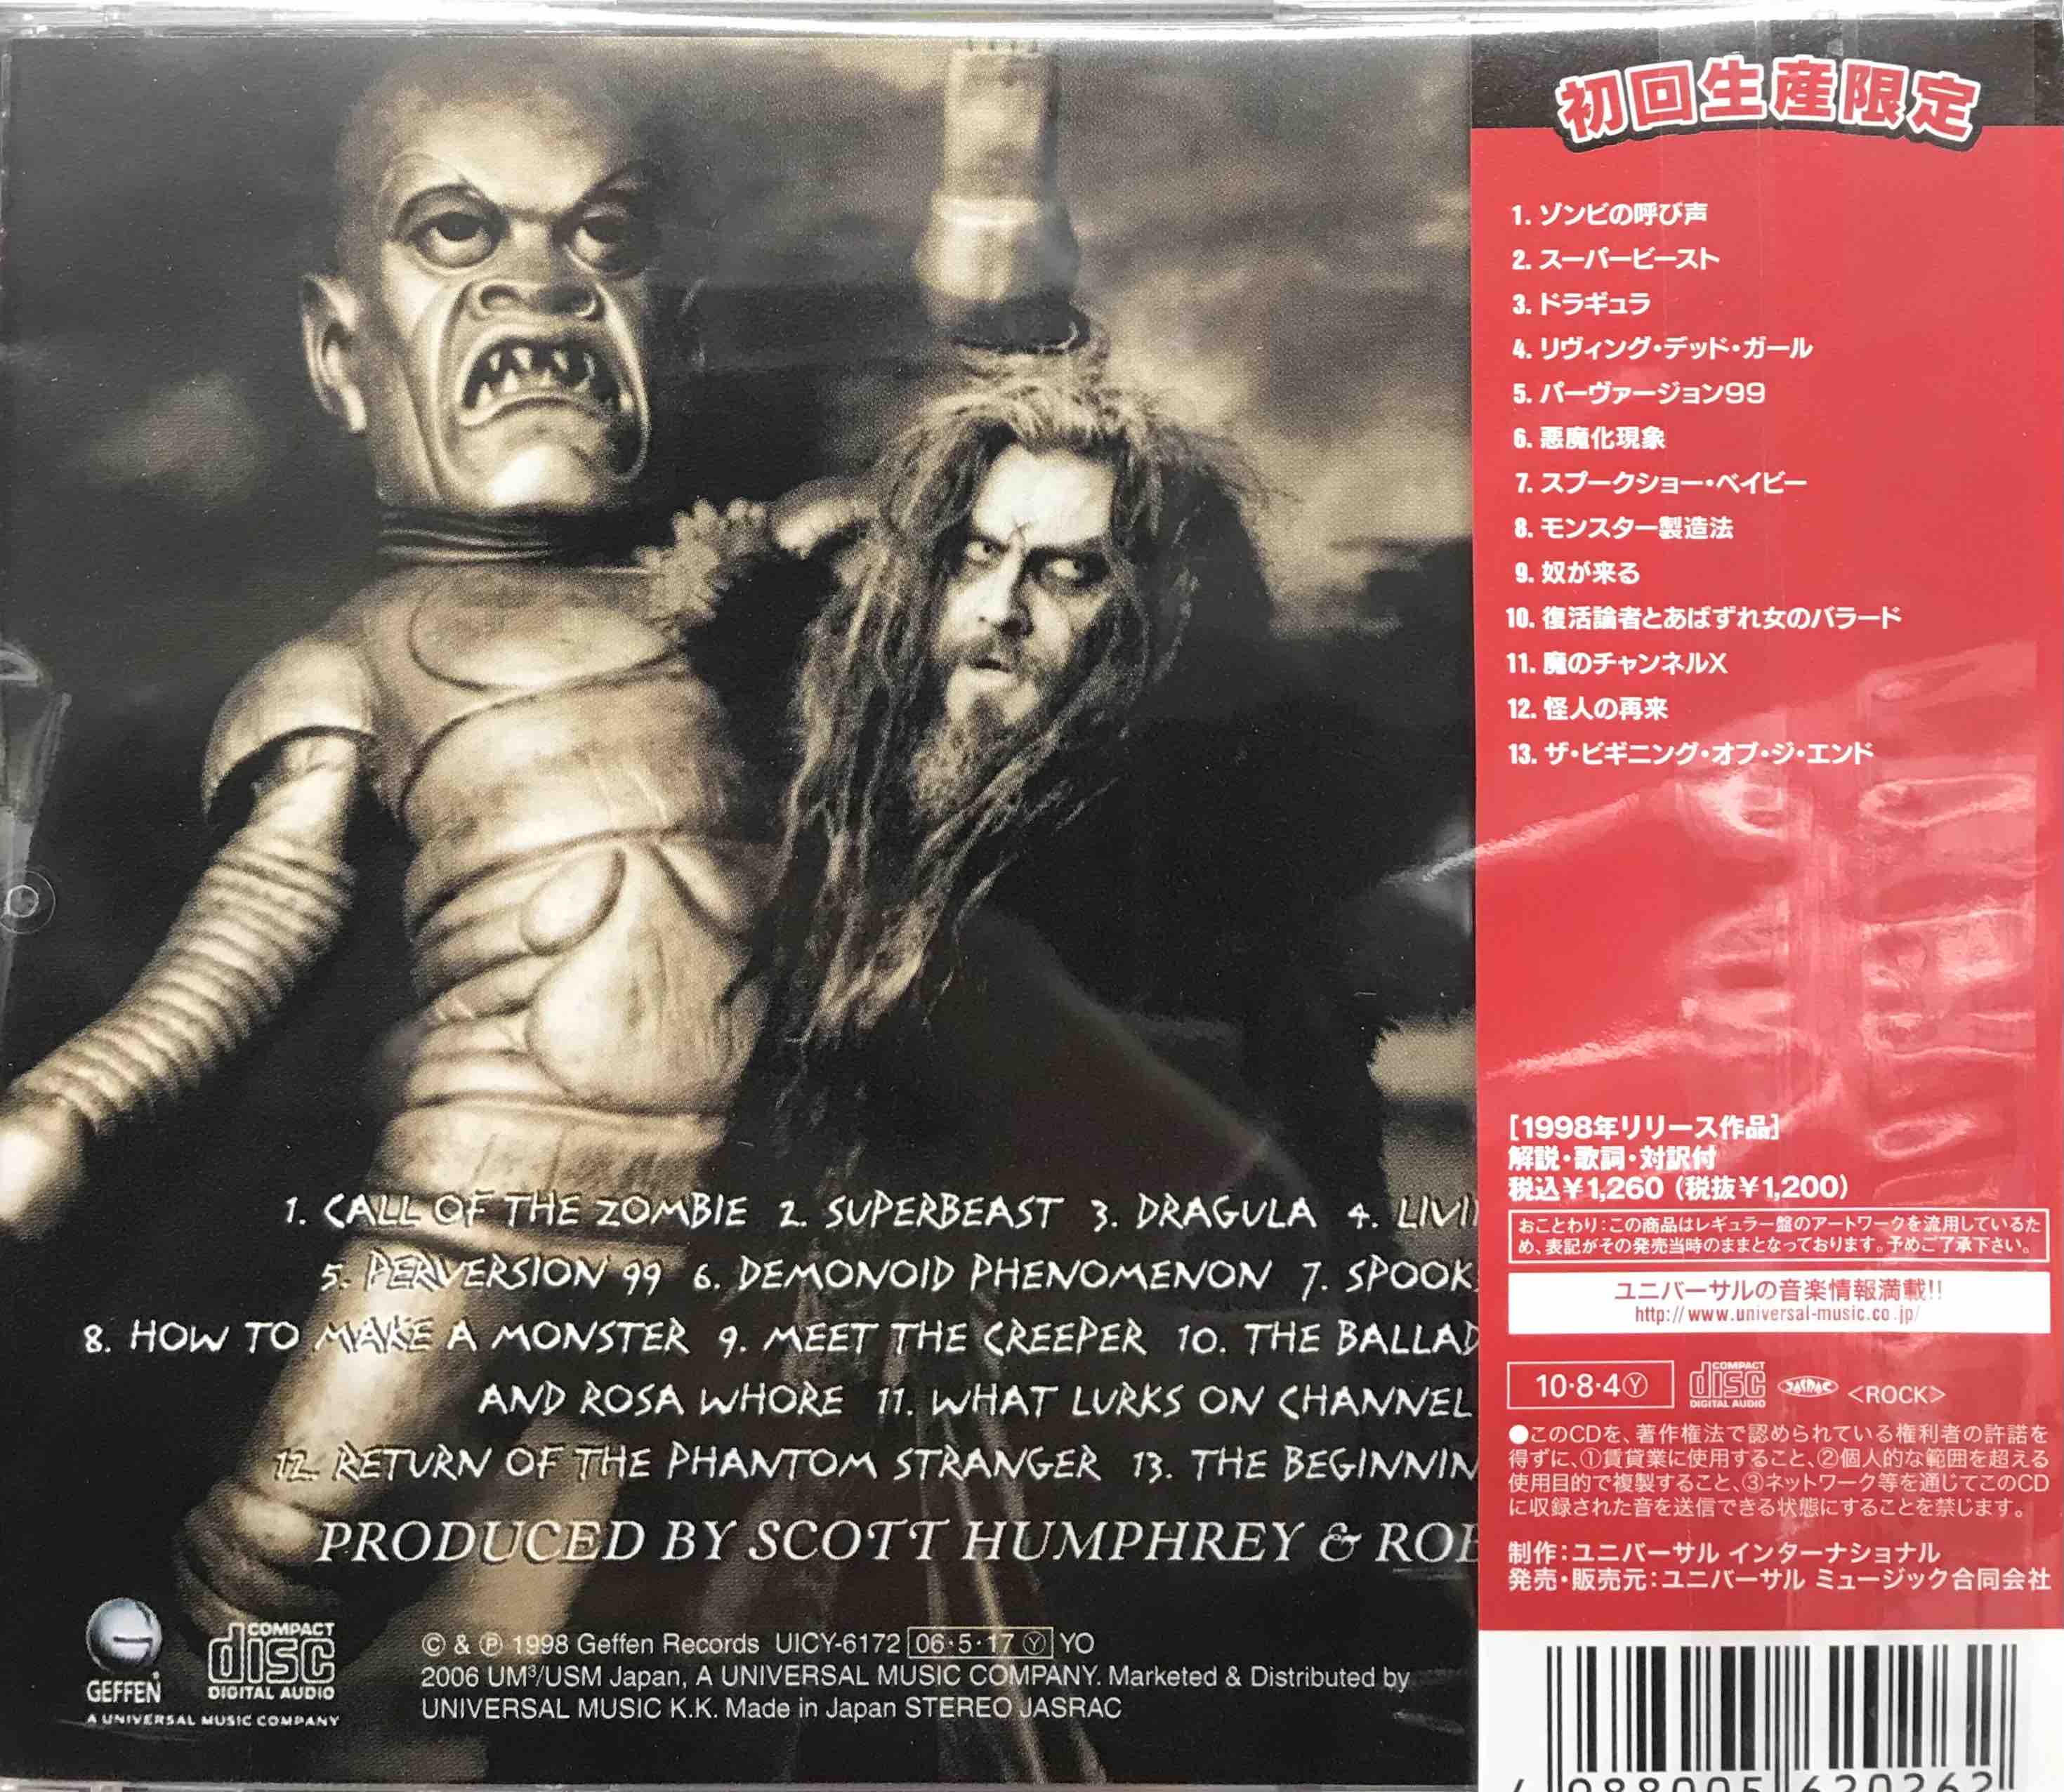 Rob Zombie ‎– Hellbilly Deluxe     (Pre-owned)